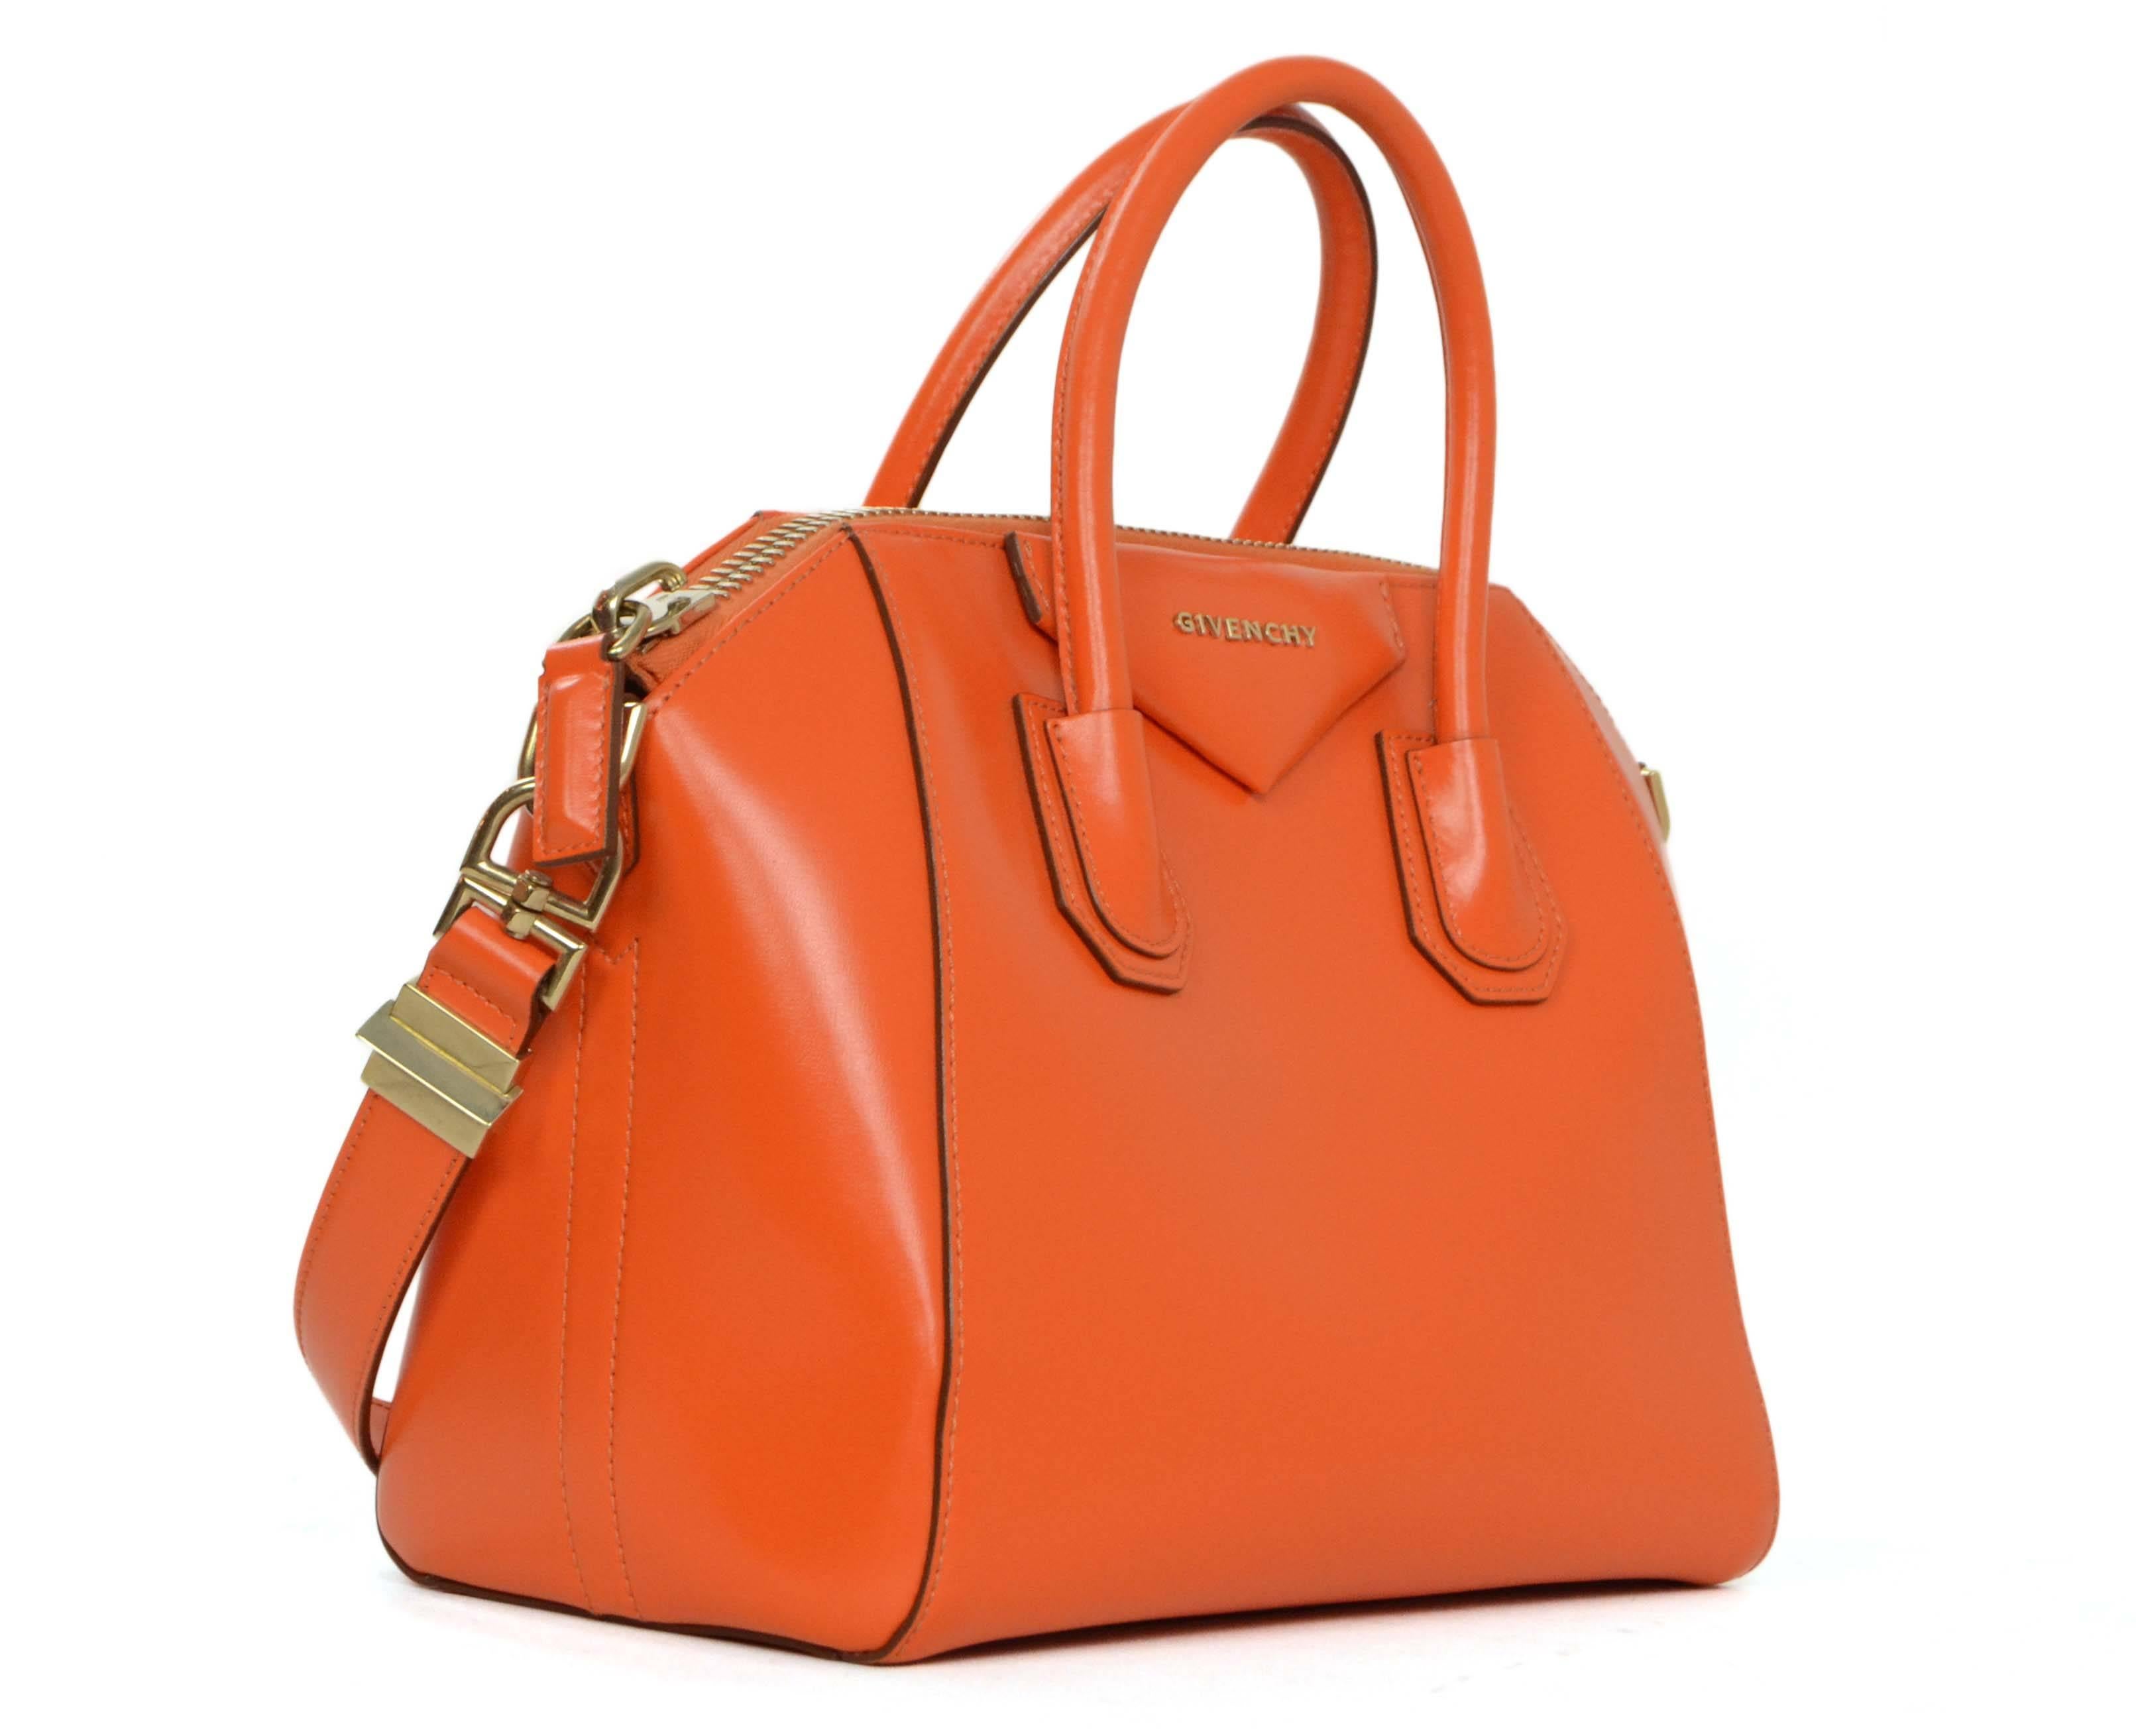 Givenchy Orange Leather Small Antigona Bag 
Made In: Italy
Color: Orange
Hardware: Goldtone
Materials: Leather and metal
Lining: Beige canvas
Closure/Opening: Zip around closure
Exterior Pockets: None
Interior Pockets: One zipper pocket, one